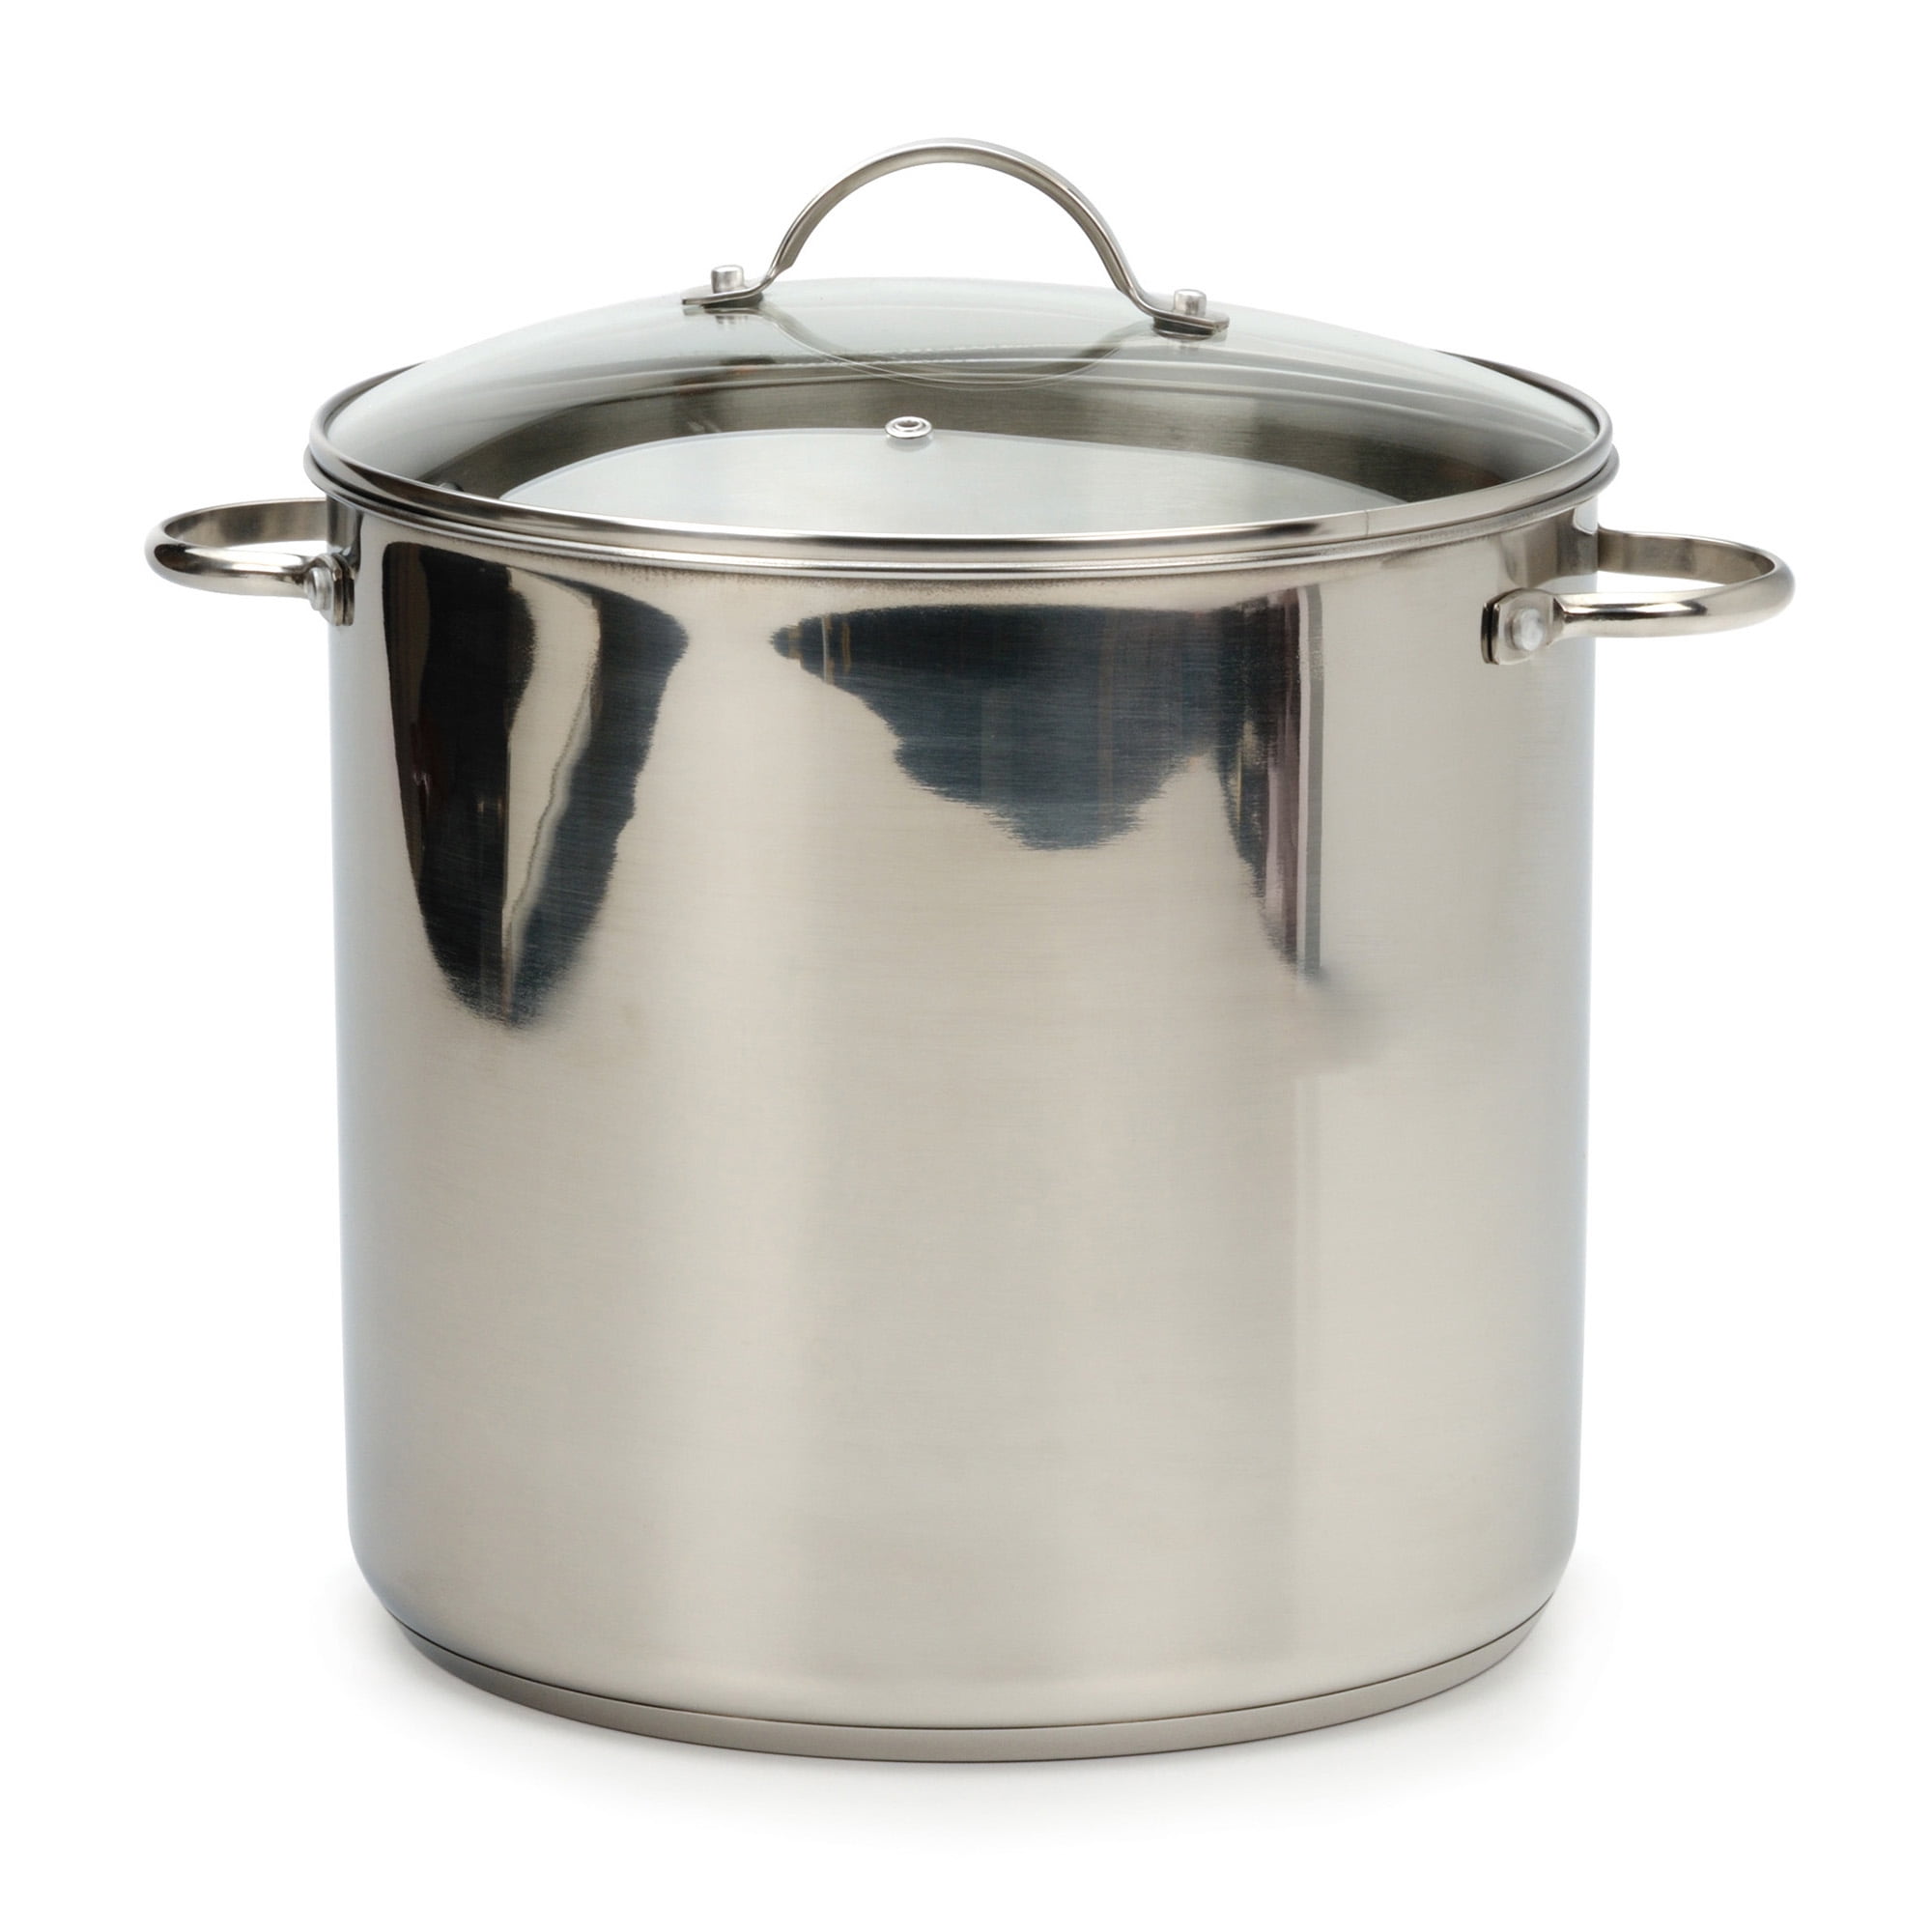 Oster Stock Pot 16 Qt Stainless Steel Aluminum Base Lid 2 in Riveted Handles 